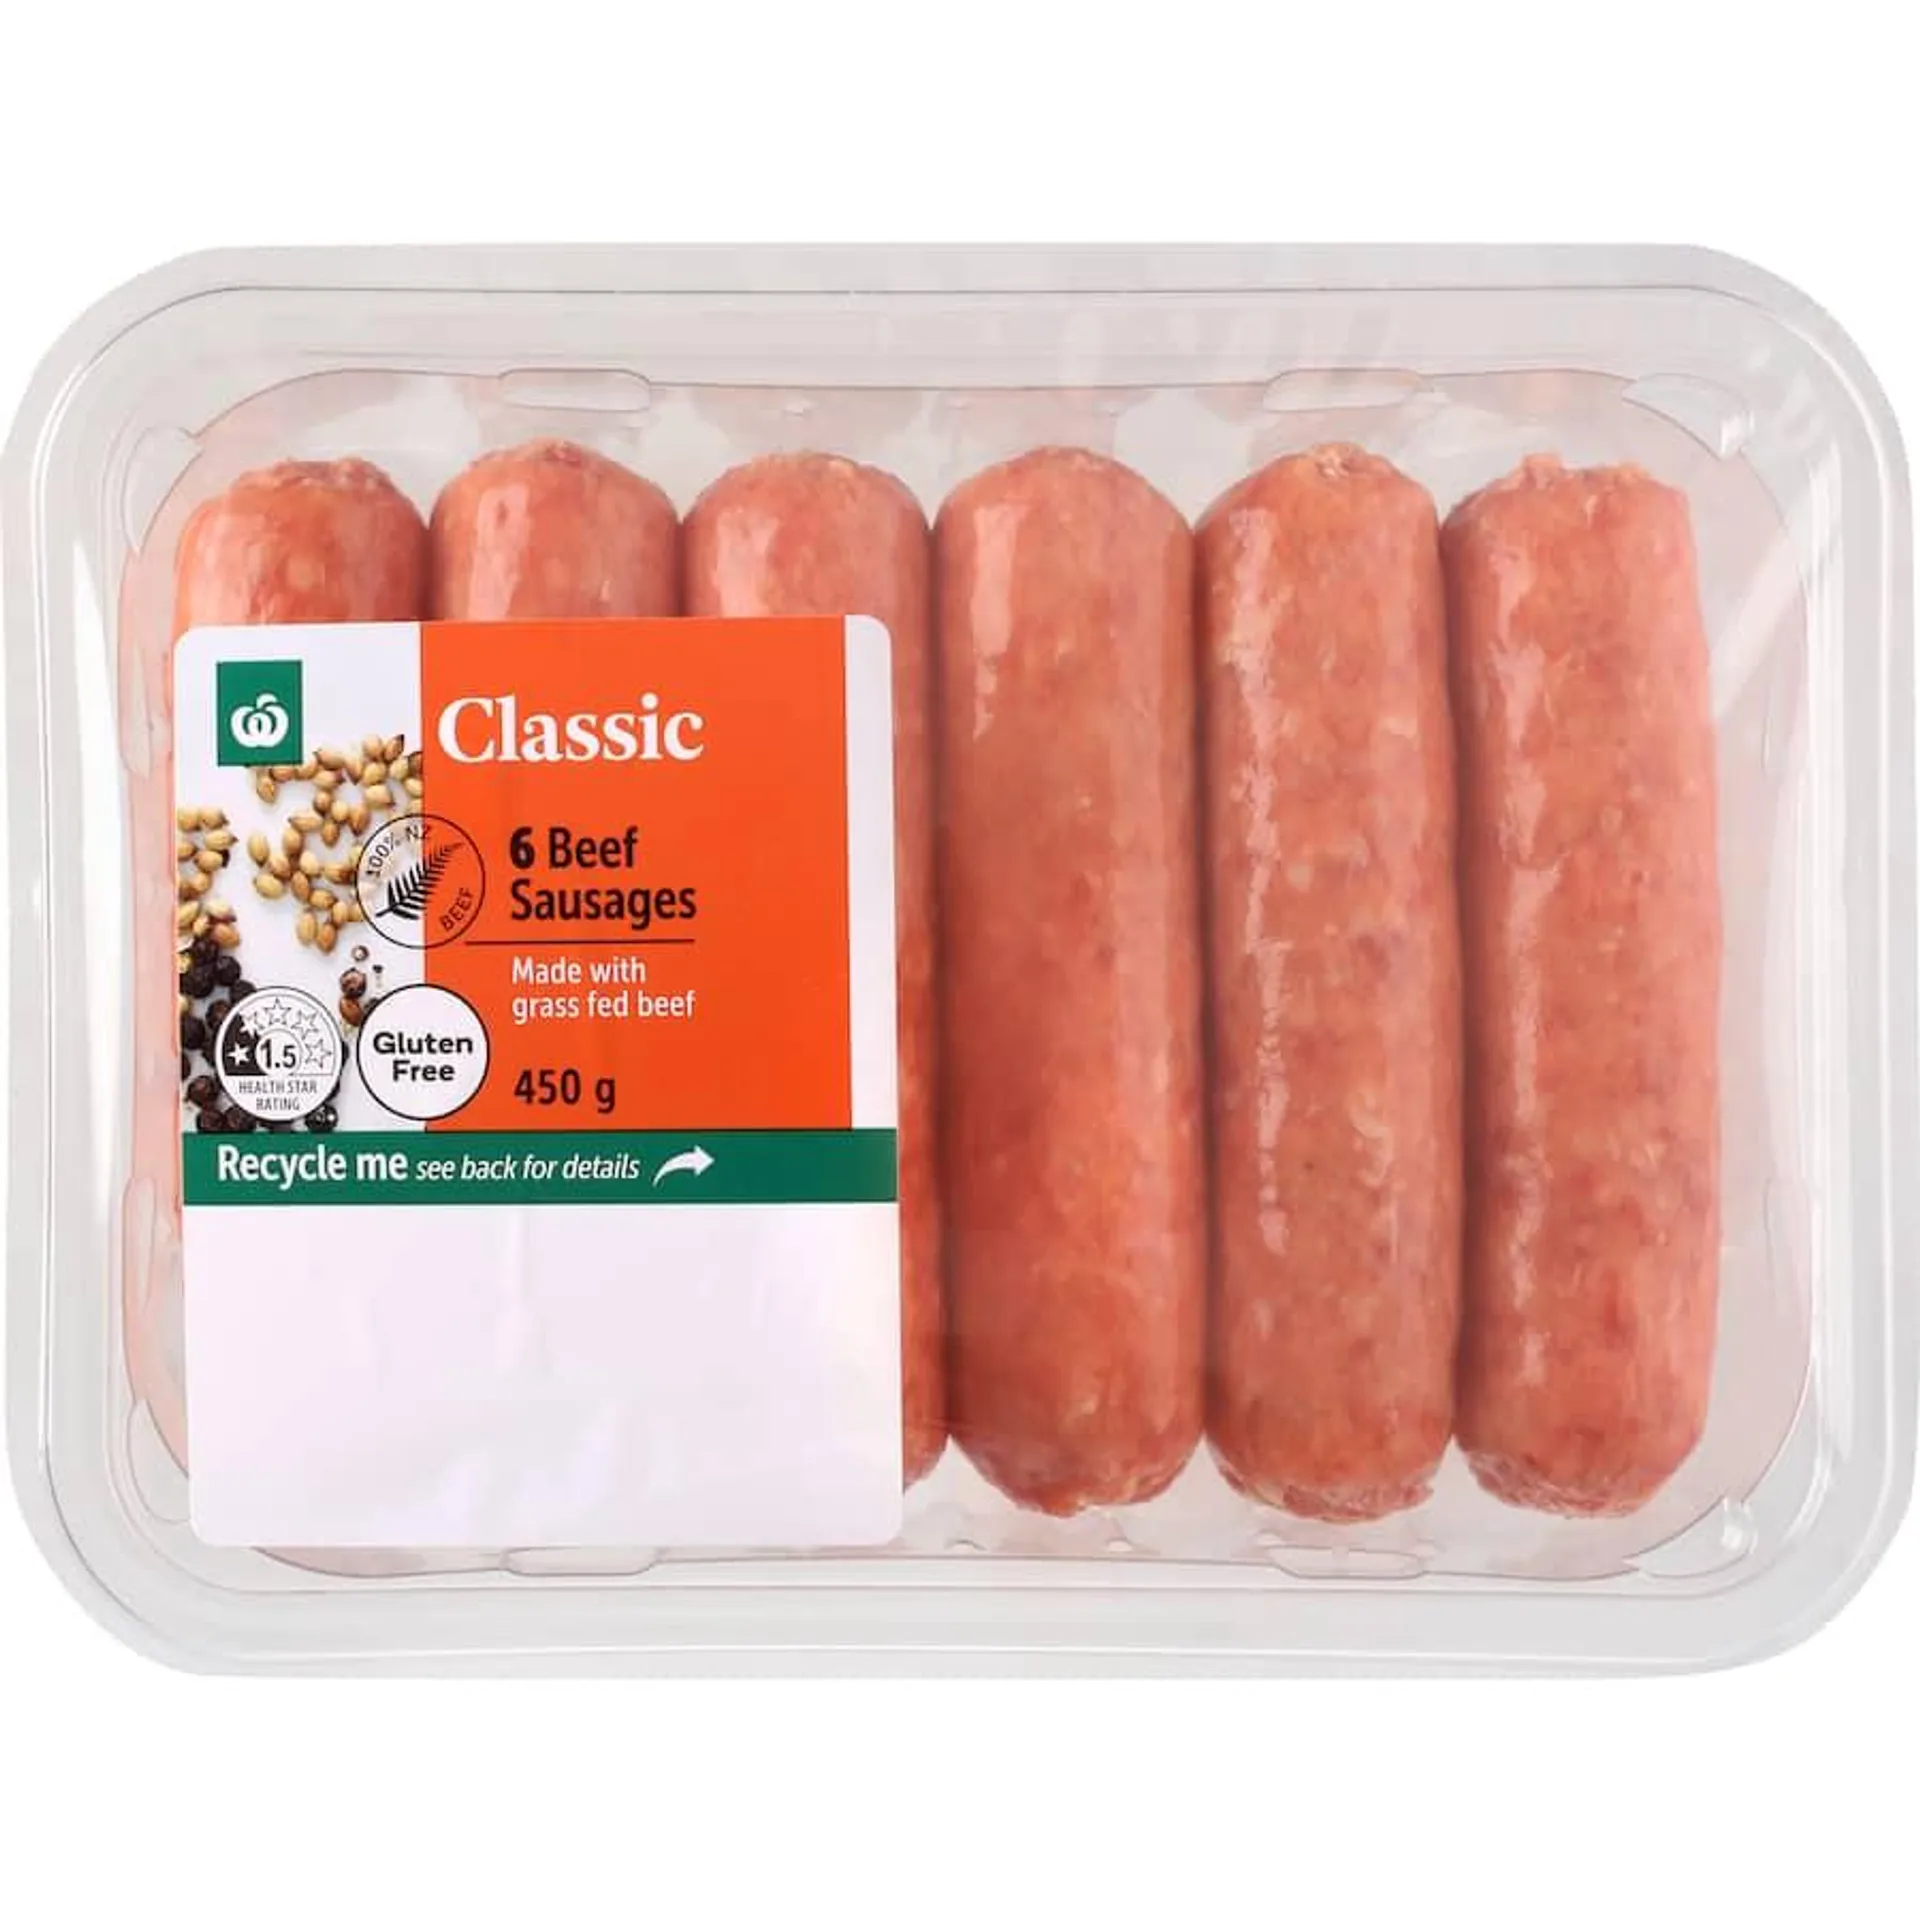 Woolworths Sausages Classic Beef